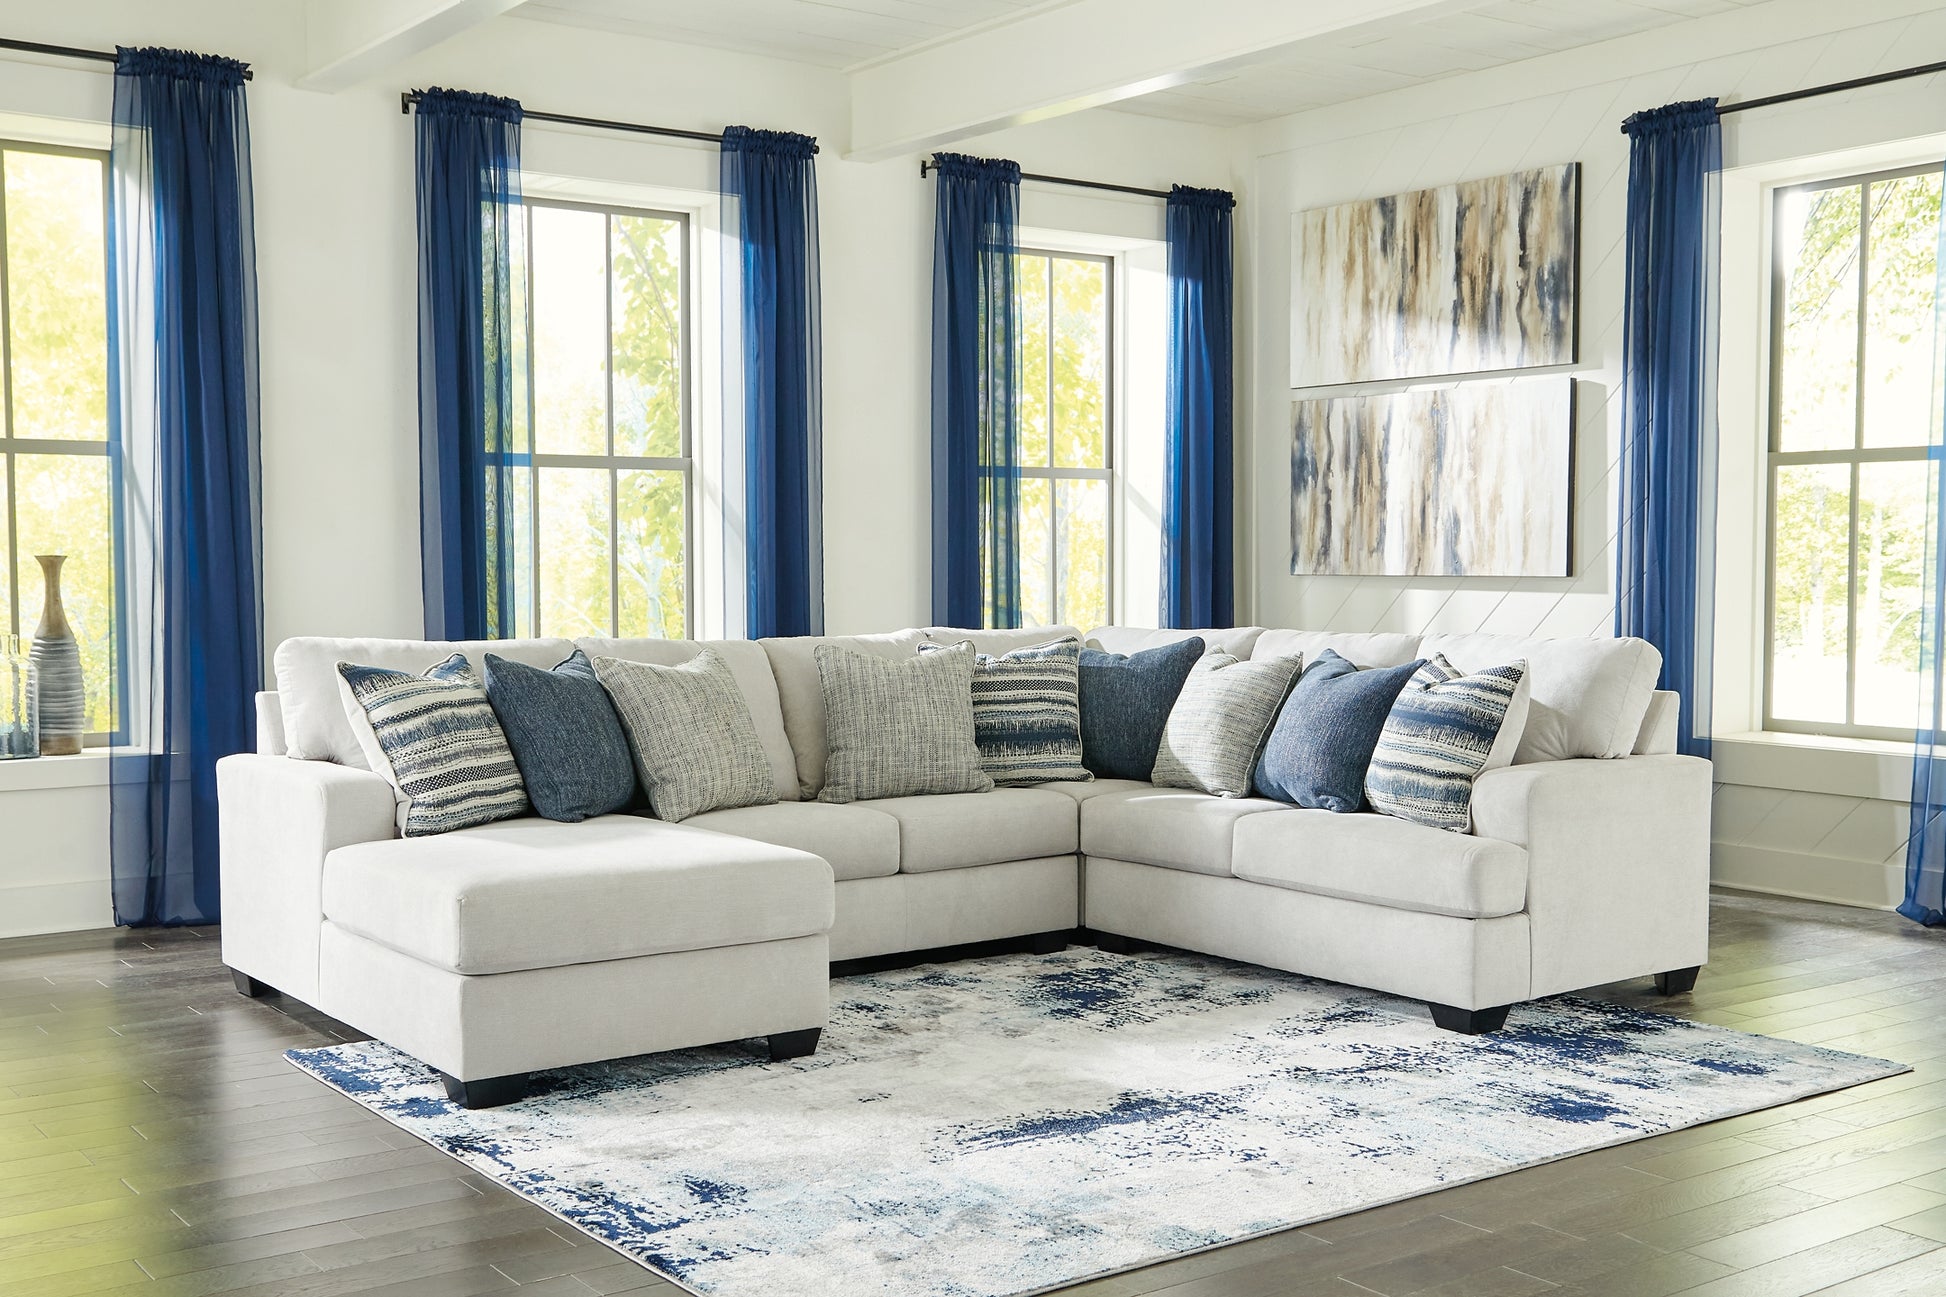 Lowder 4-Piece Sectional with Chaise Wilson Furniture (OH)  in Bridgeport, Ohio. Serving Bridgeport, Yorkville, Bellaire, & Avondale